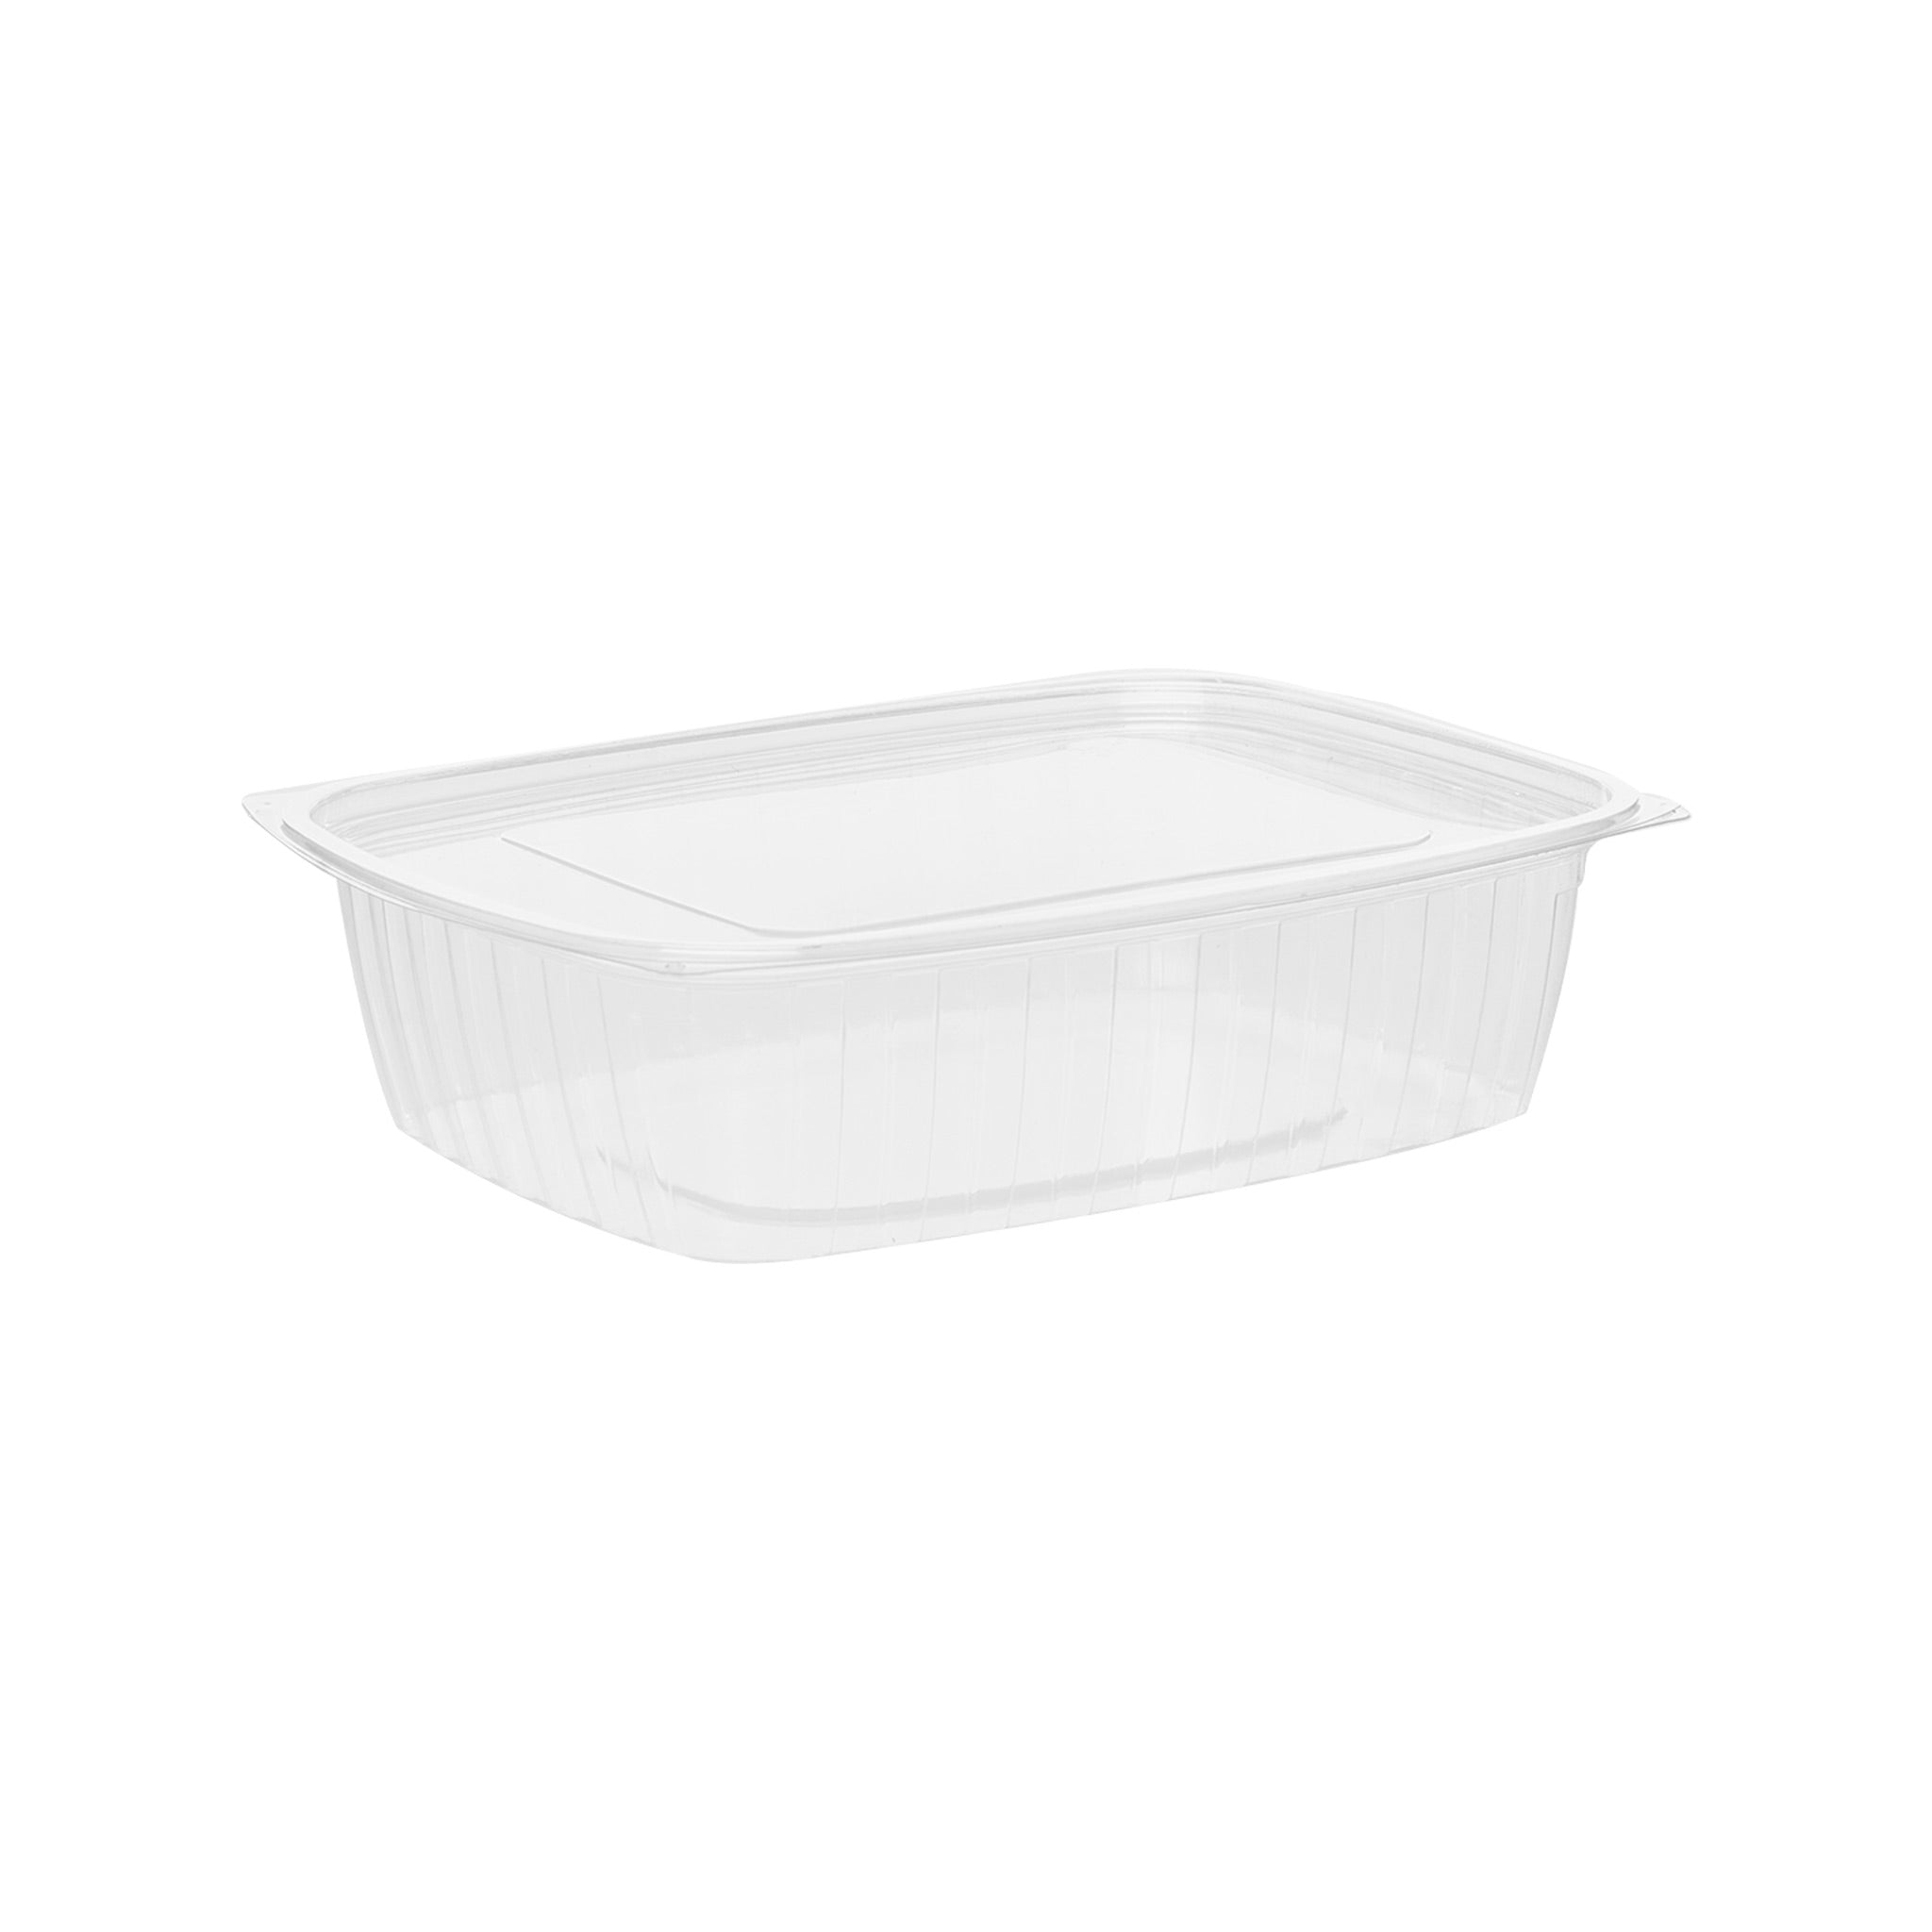 Crystal Clear Cont. 48 Oz + Lid 250 Sets - Hotpack Bahrain